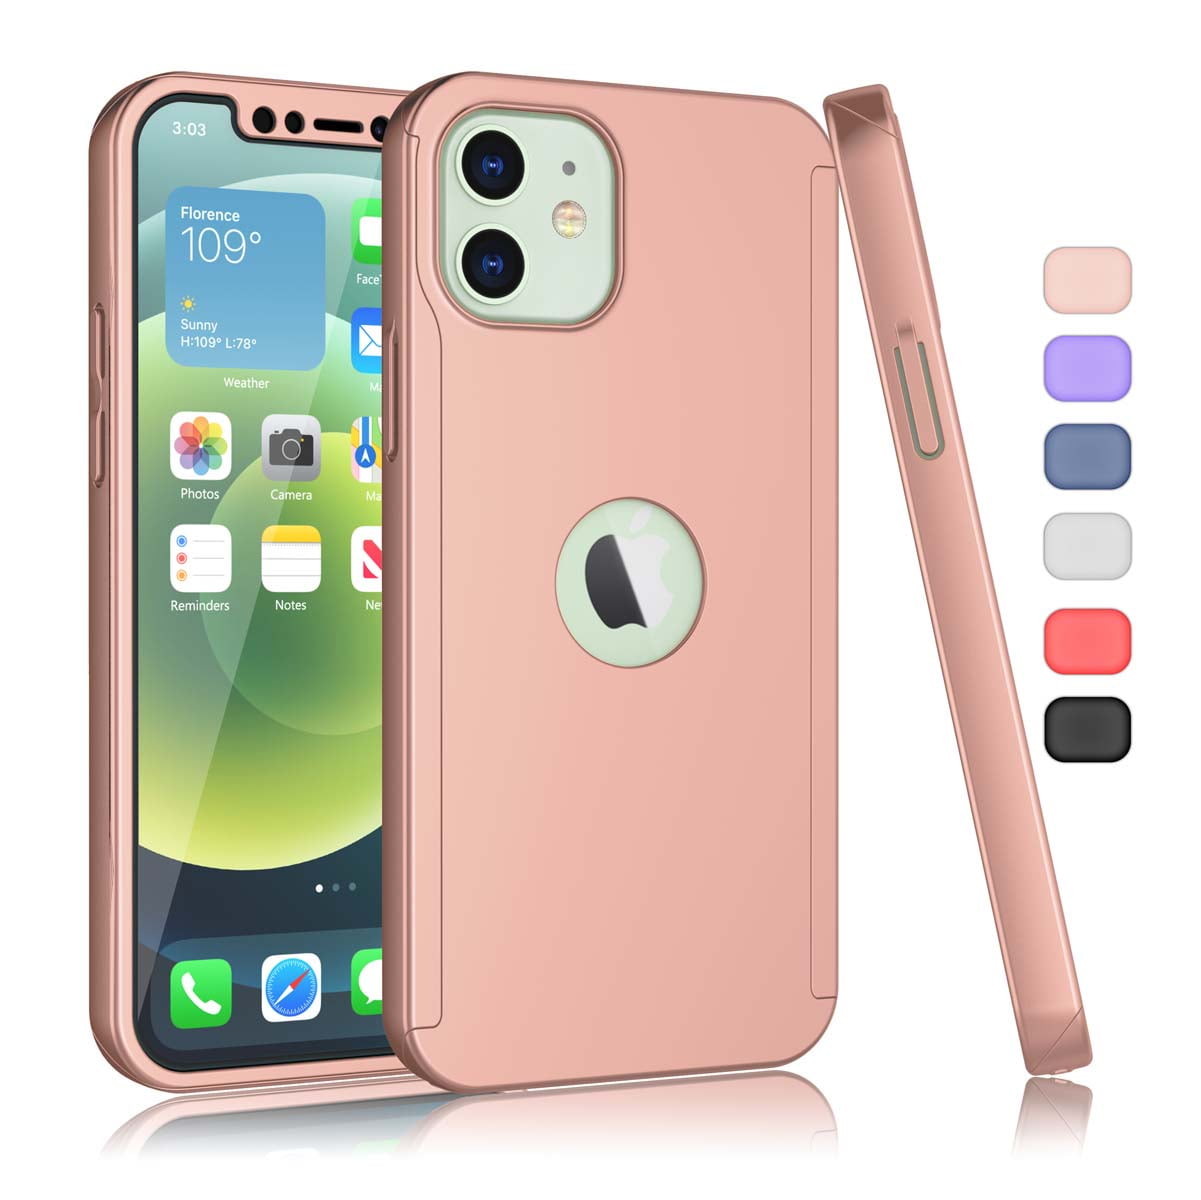 Hot For iphone 12 Pro Max case,ClearHard PC+Soft Silicone 3Layers Hybrid 360 Degree Full Body Protect Popular for iphone 12 mini